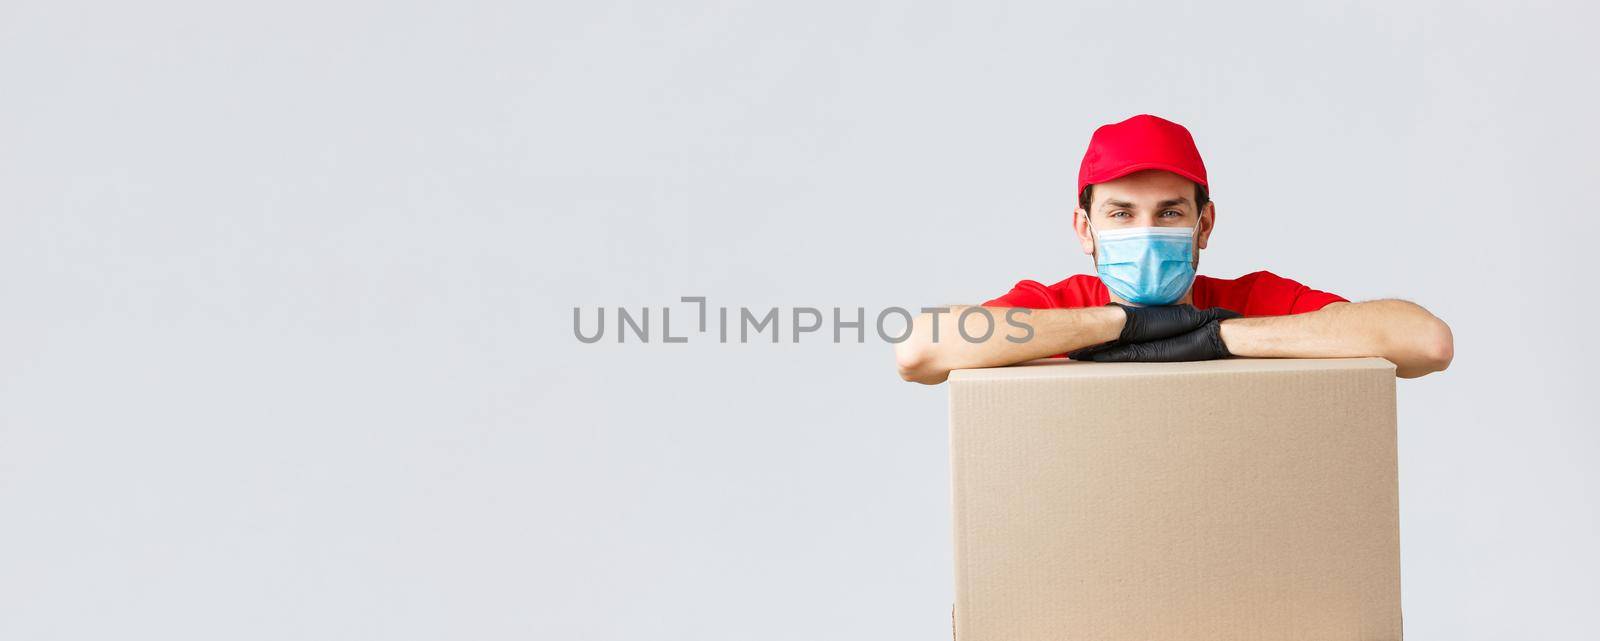 Packages and parcels delivery, covid-19 quarantine and transfer orders. Young courier in red uniform cap, face mask and gloves, leaning on box to deliver, shipping your orders, grey background by Benzoix